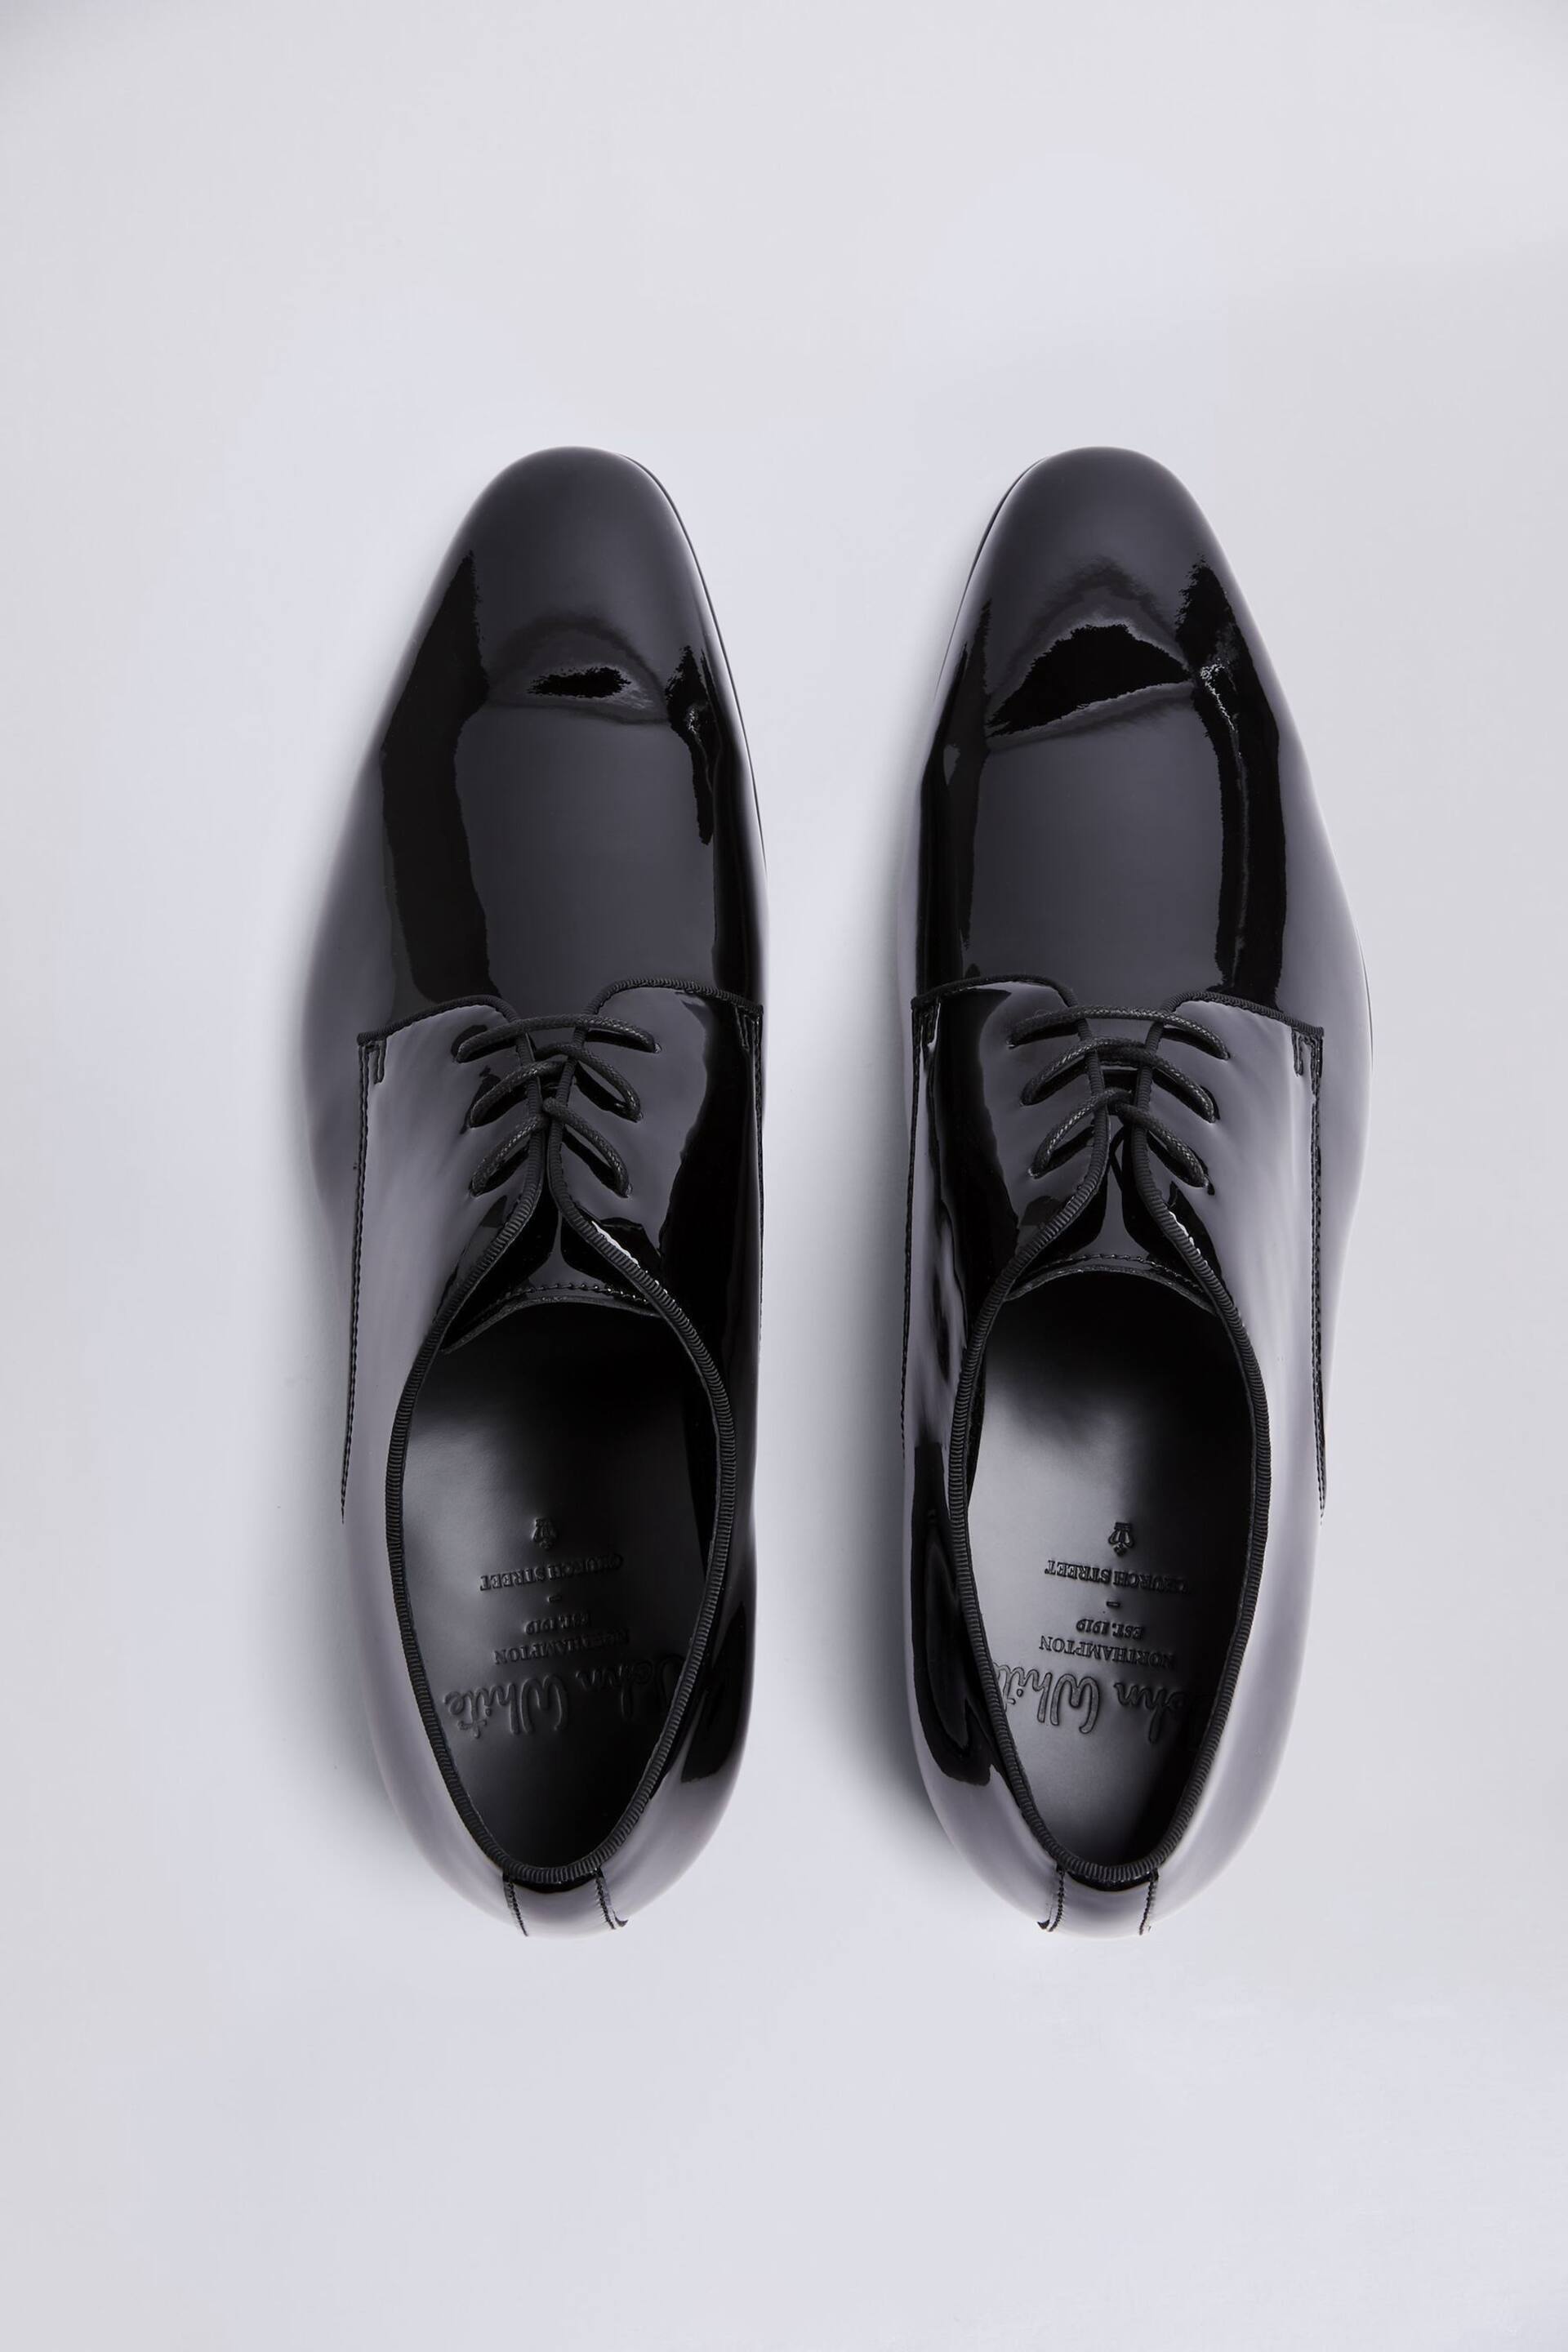 MOSS Ivy Black Patent Dress Shoes - Image 2 of 3